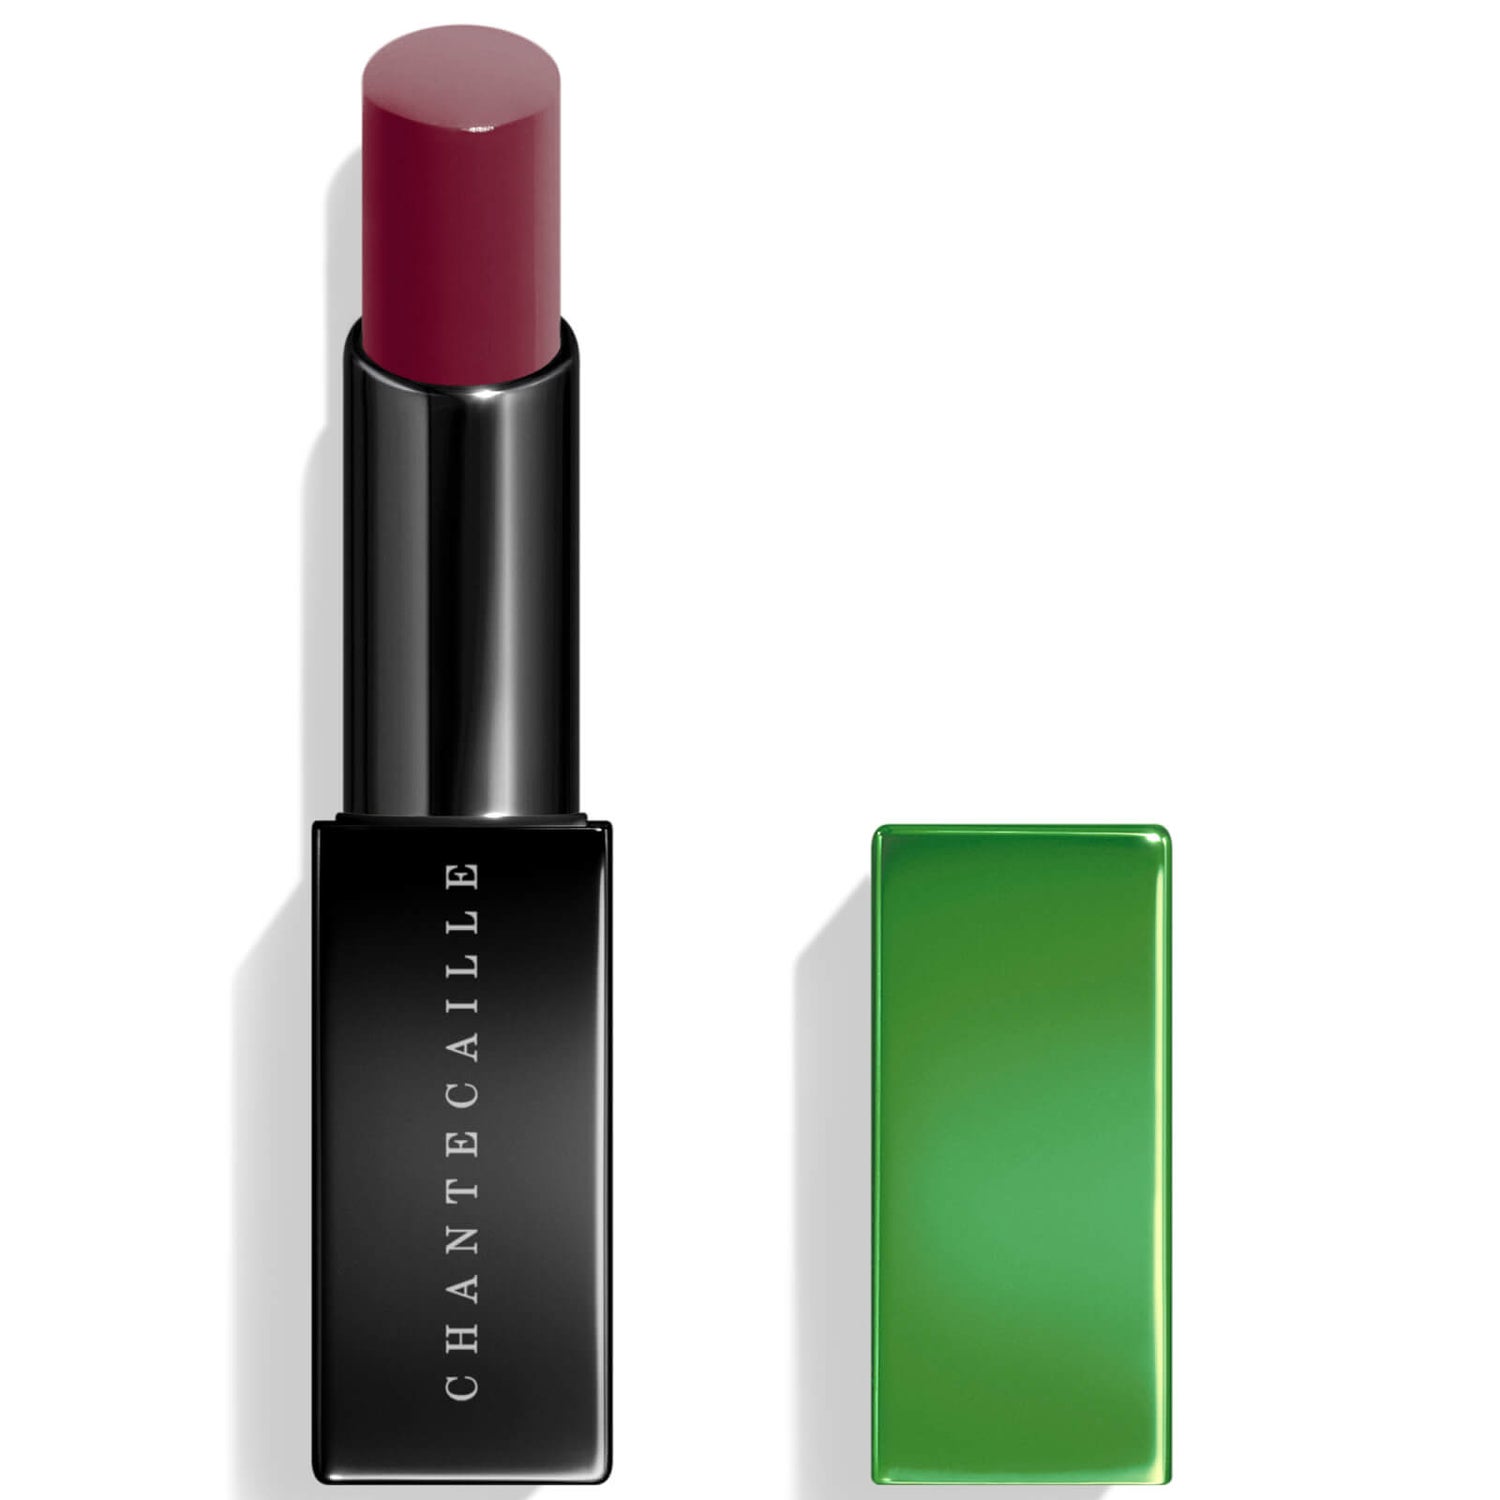 Chantecaille Orchid Lip Chic 2.5g